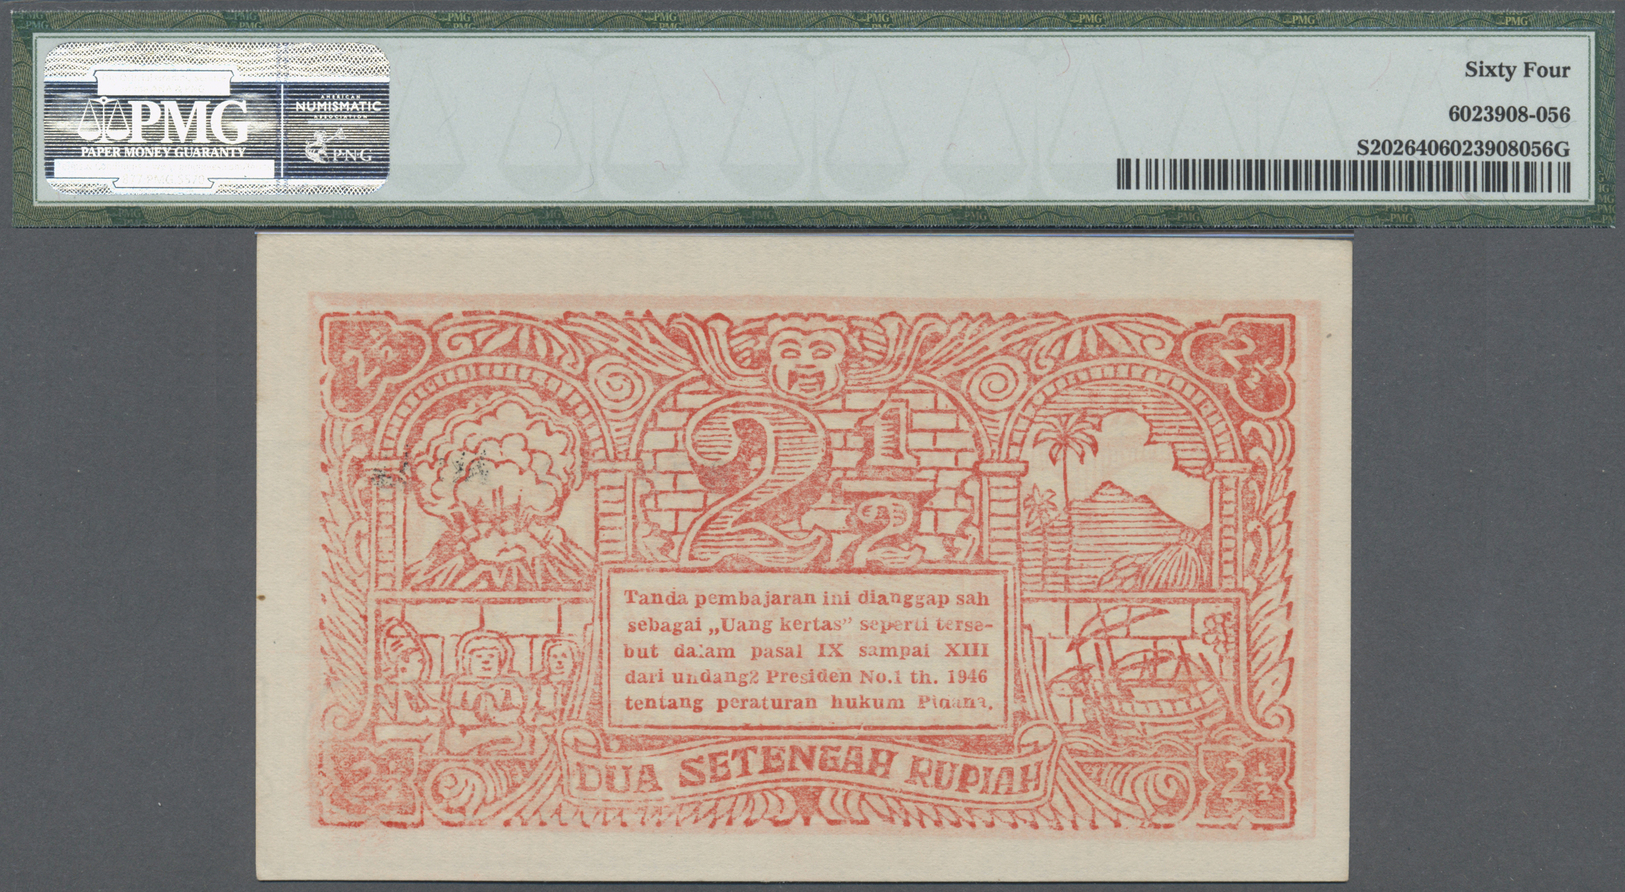 01194 Indonesia / Indonesien: Sub-Province Of South Sumatra 2 1/2 Rupiah 1948, P.S202 In Exceptional Great Condition Wit - Indonesia